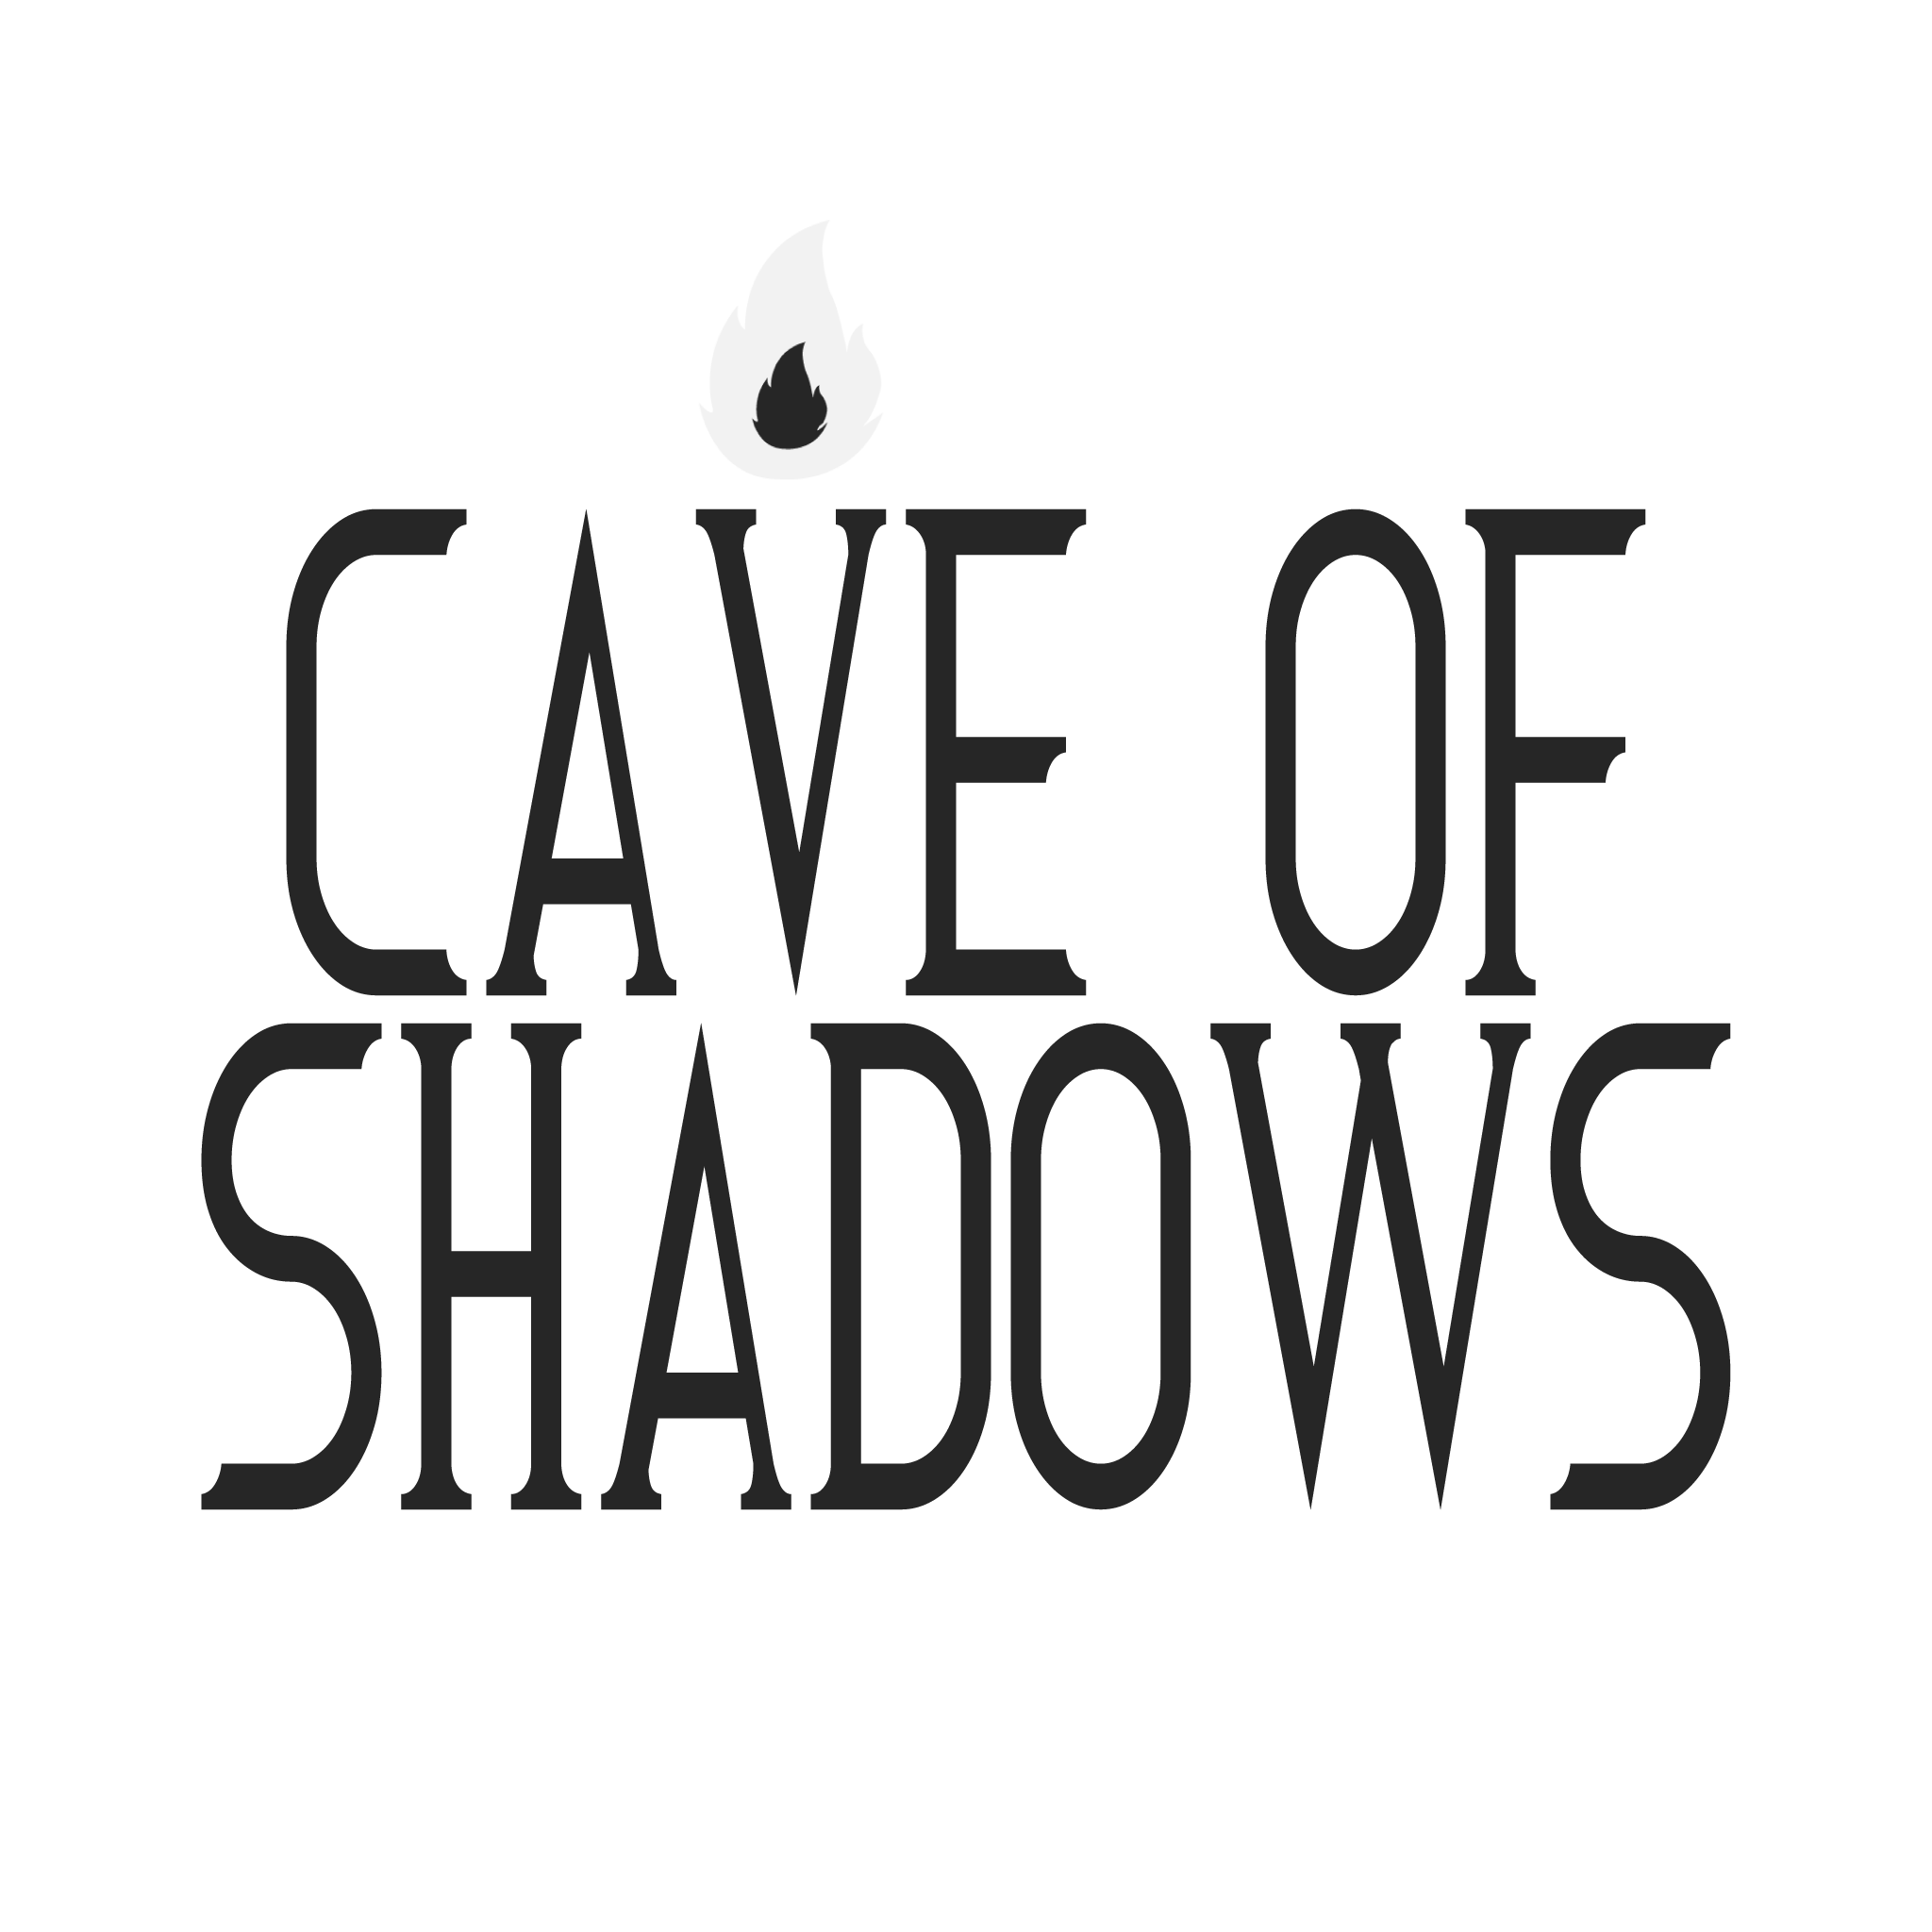 Cave of Shadows